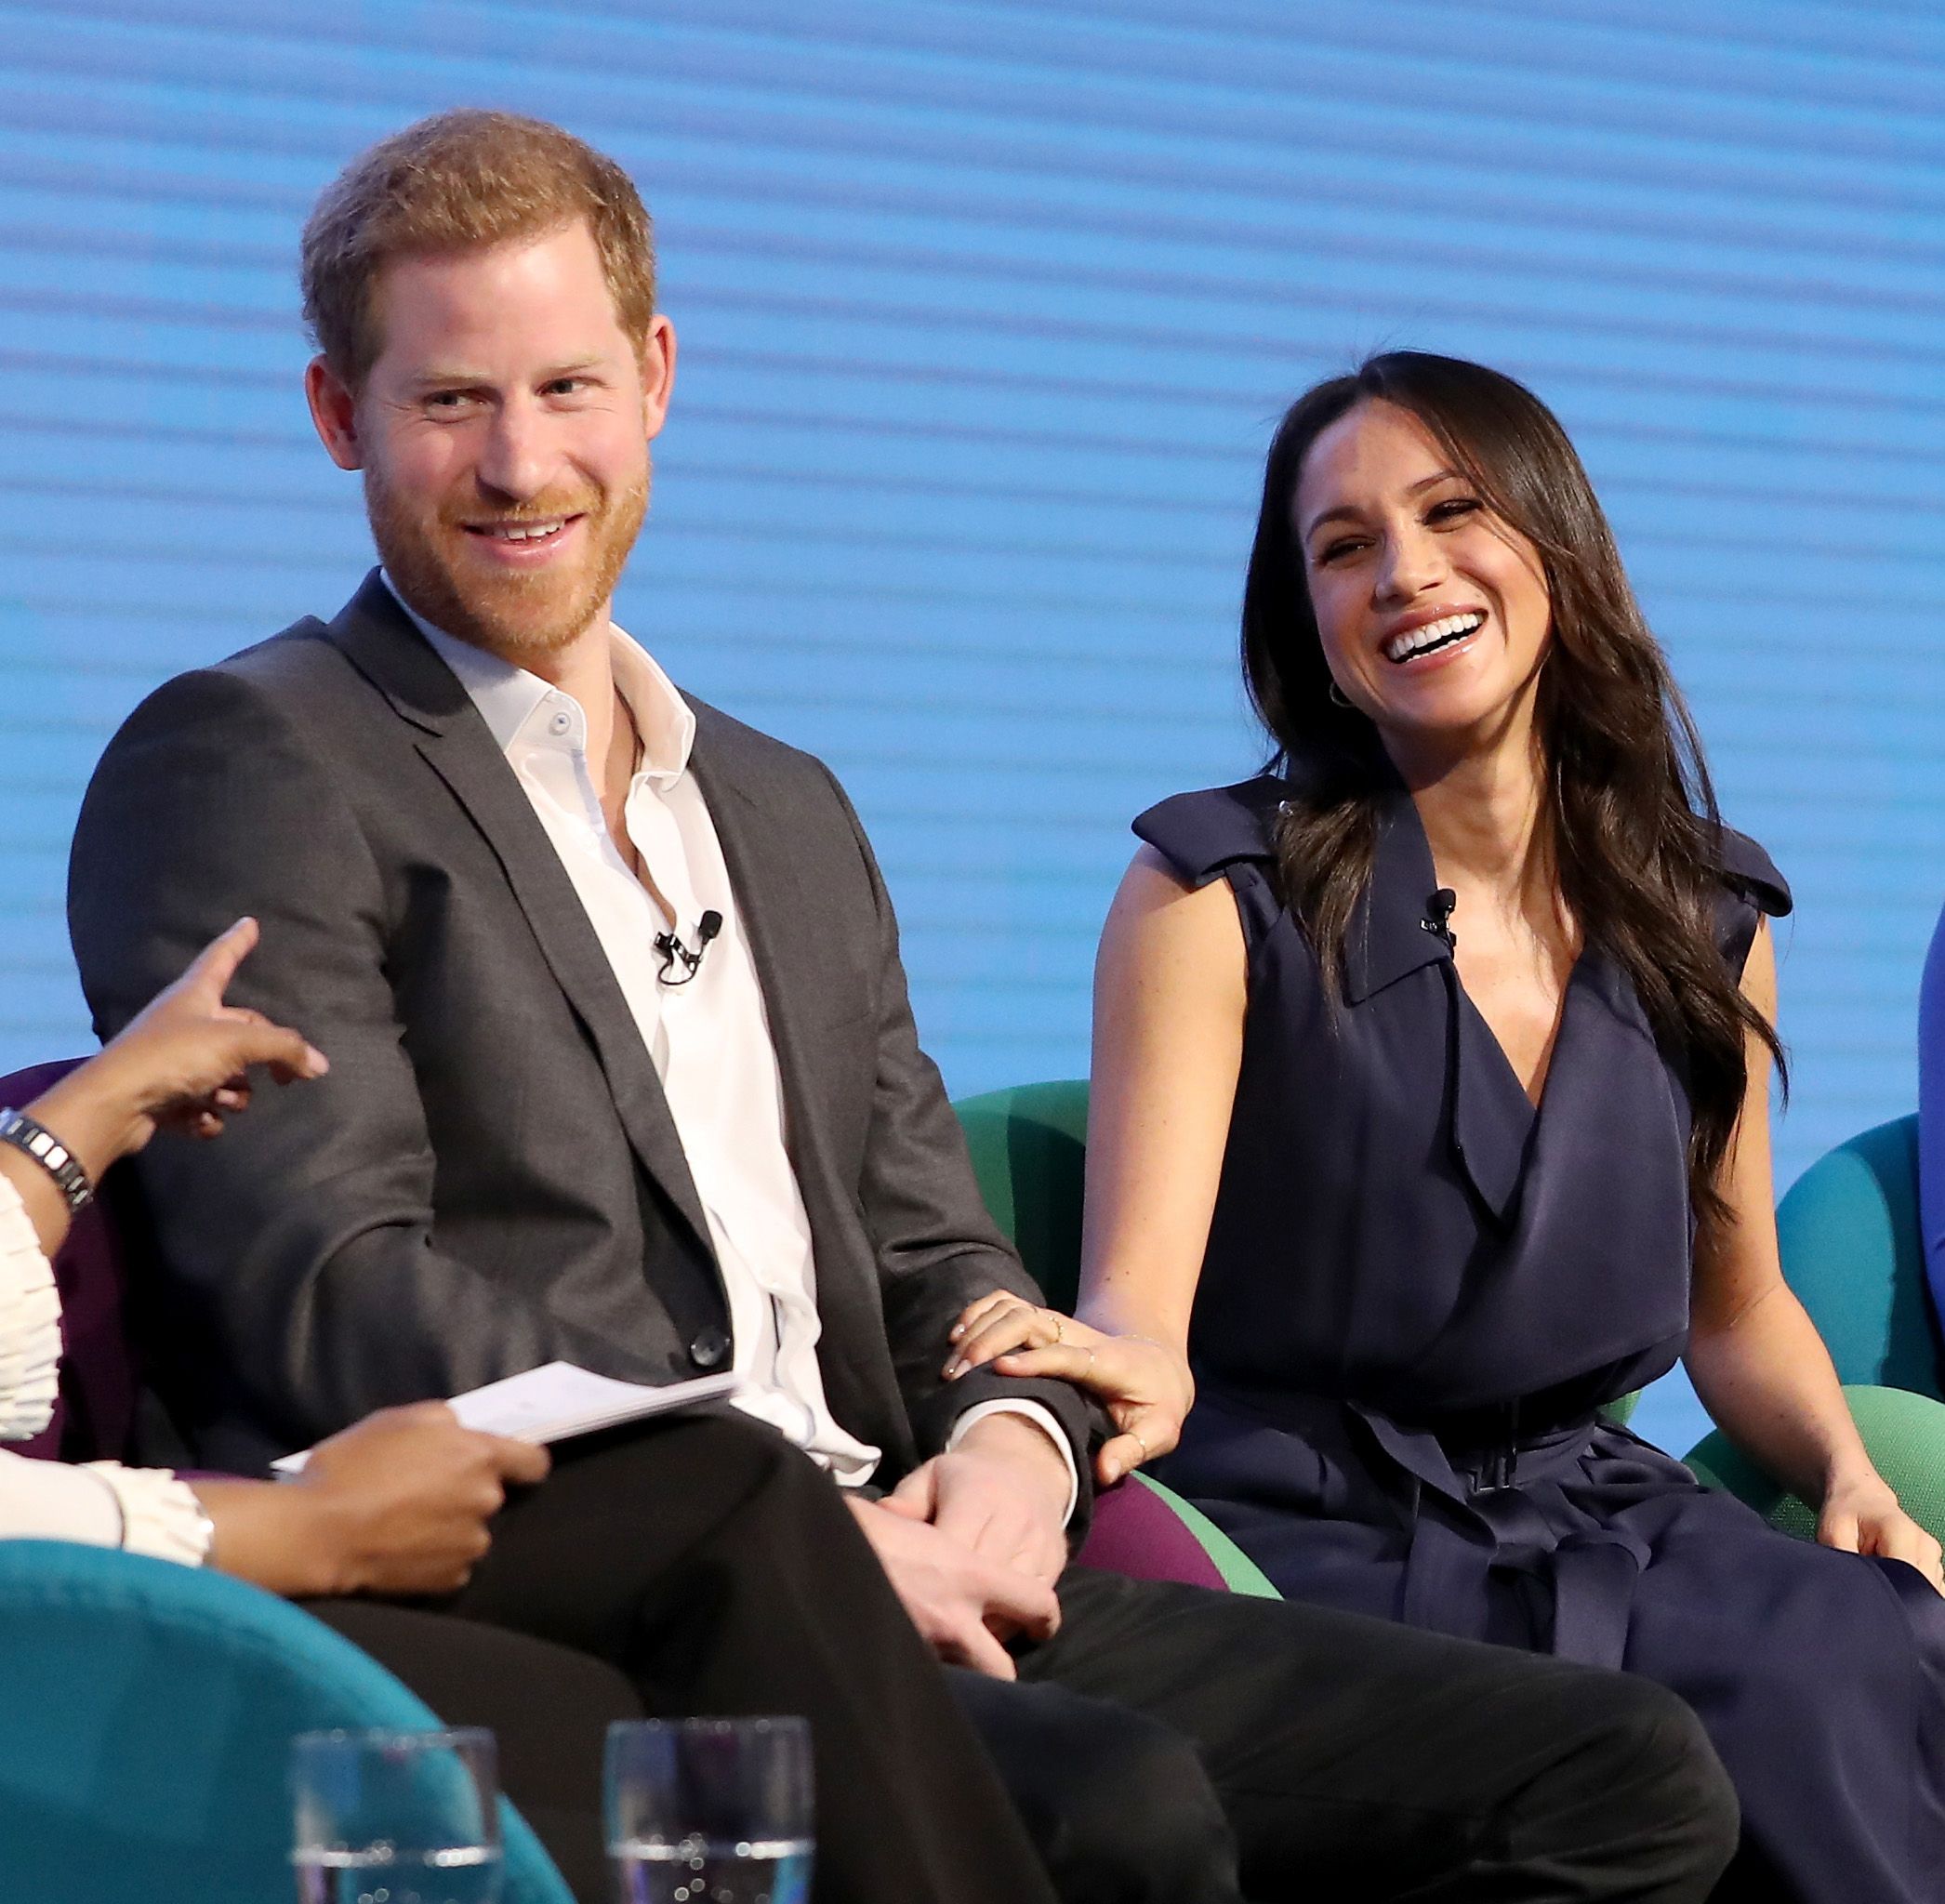 https://hips.hearstapps.com/hmg-prod.s3.amazonaws.com/images/hbz-prince-harry-meghan-markle-cute-moments-gettyimages-925325748-1523378908.jpg?crop=1xw:1xh;center,top